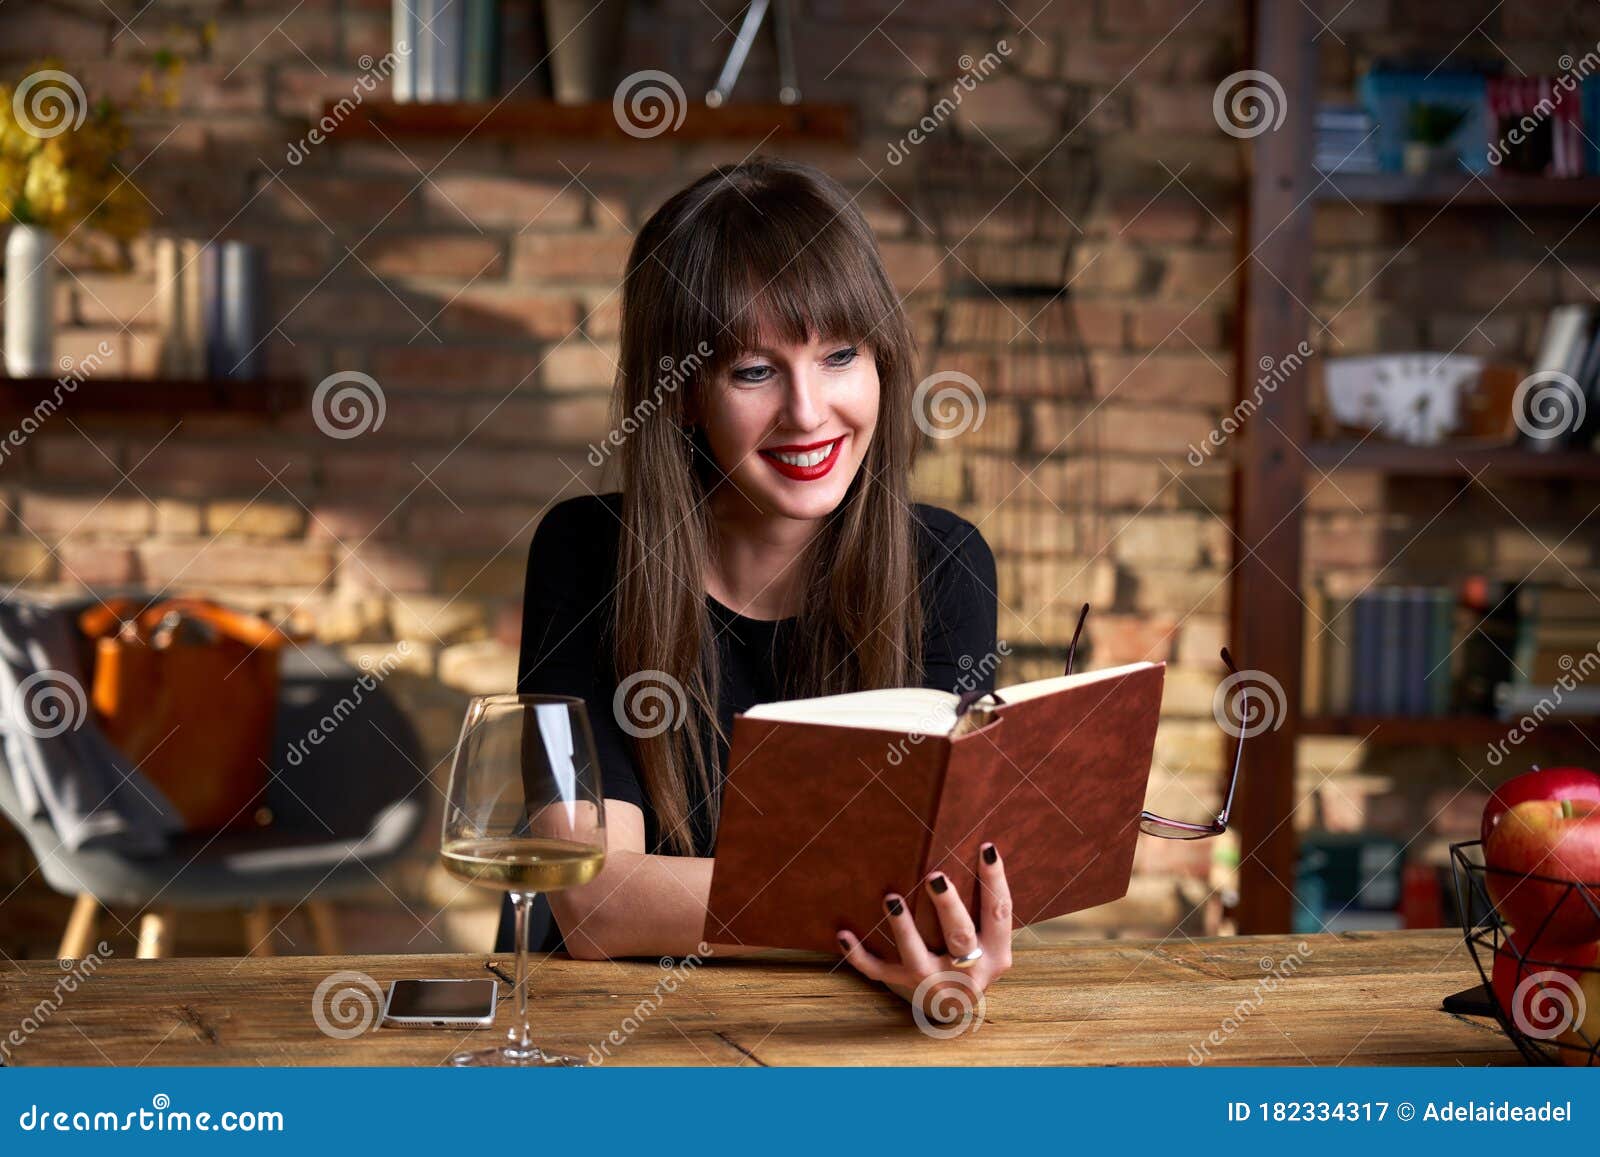 Happy Smiling White Woman Reading Book at Home in the Living Room ...